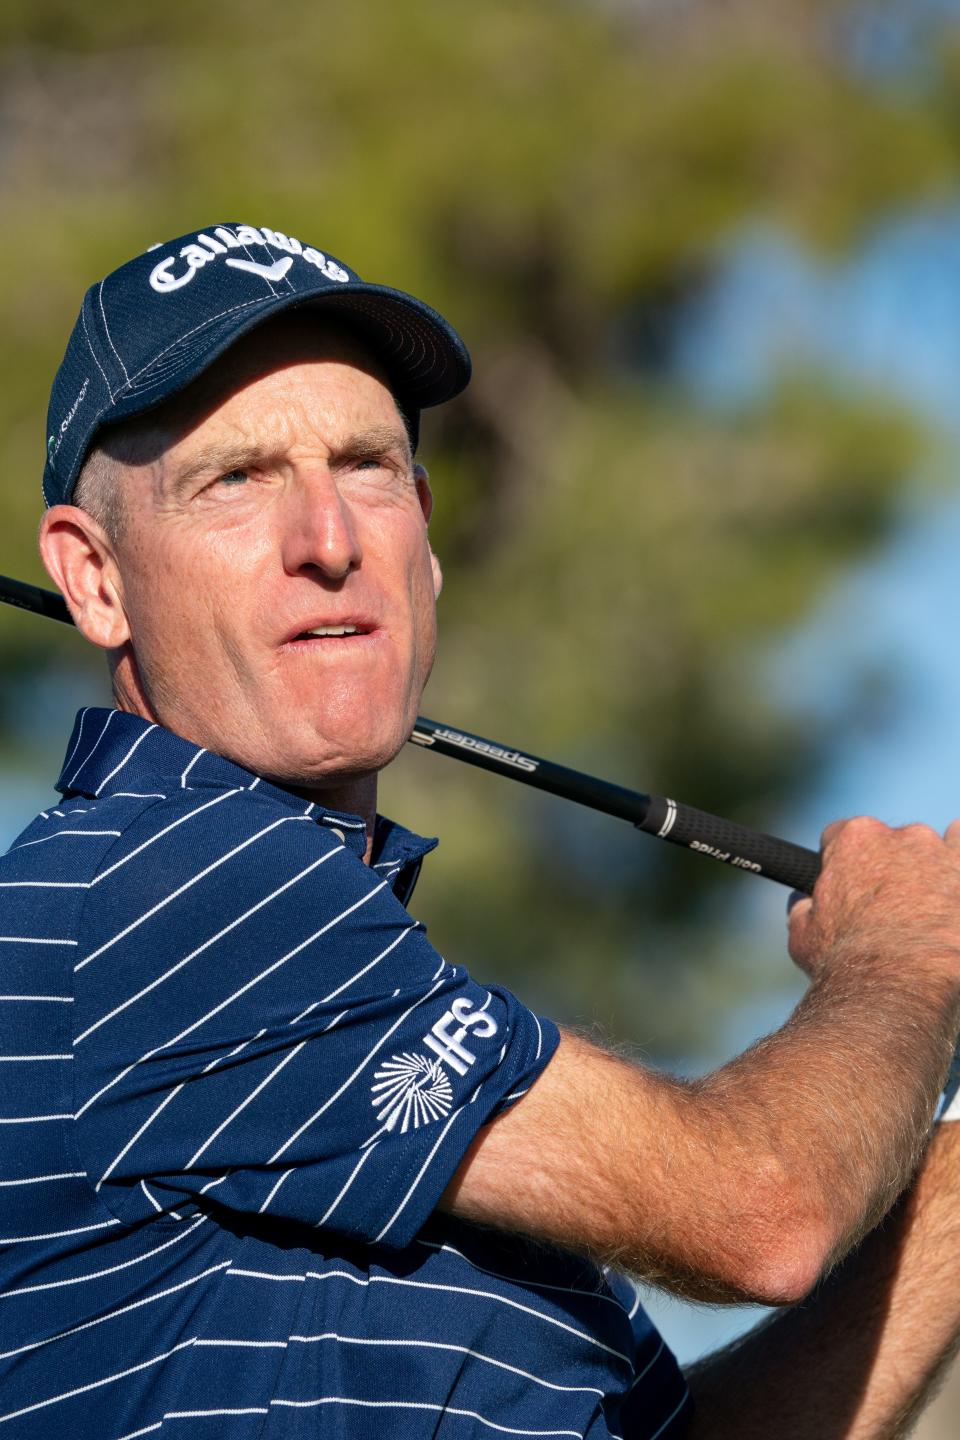 Jim Furyk reacts after hitting his tee shot on the 17th hole during the third round of the Charles Schwab Cup Championship golf tournament at Phoenix Country Club.